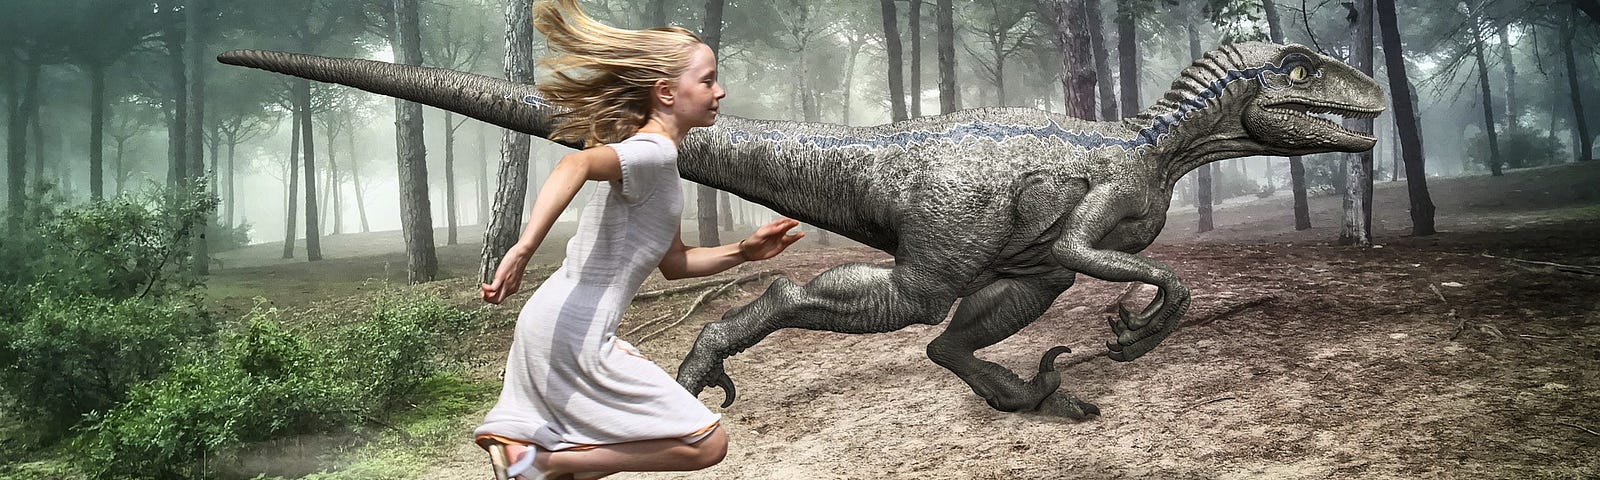 Girl in a white dress with flowing blond hair running alongside a dinosaur through a wooded area.